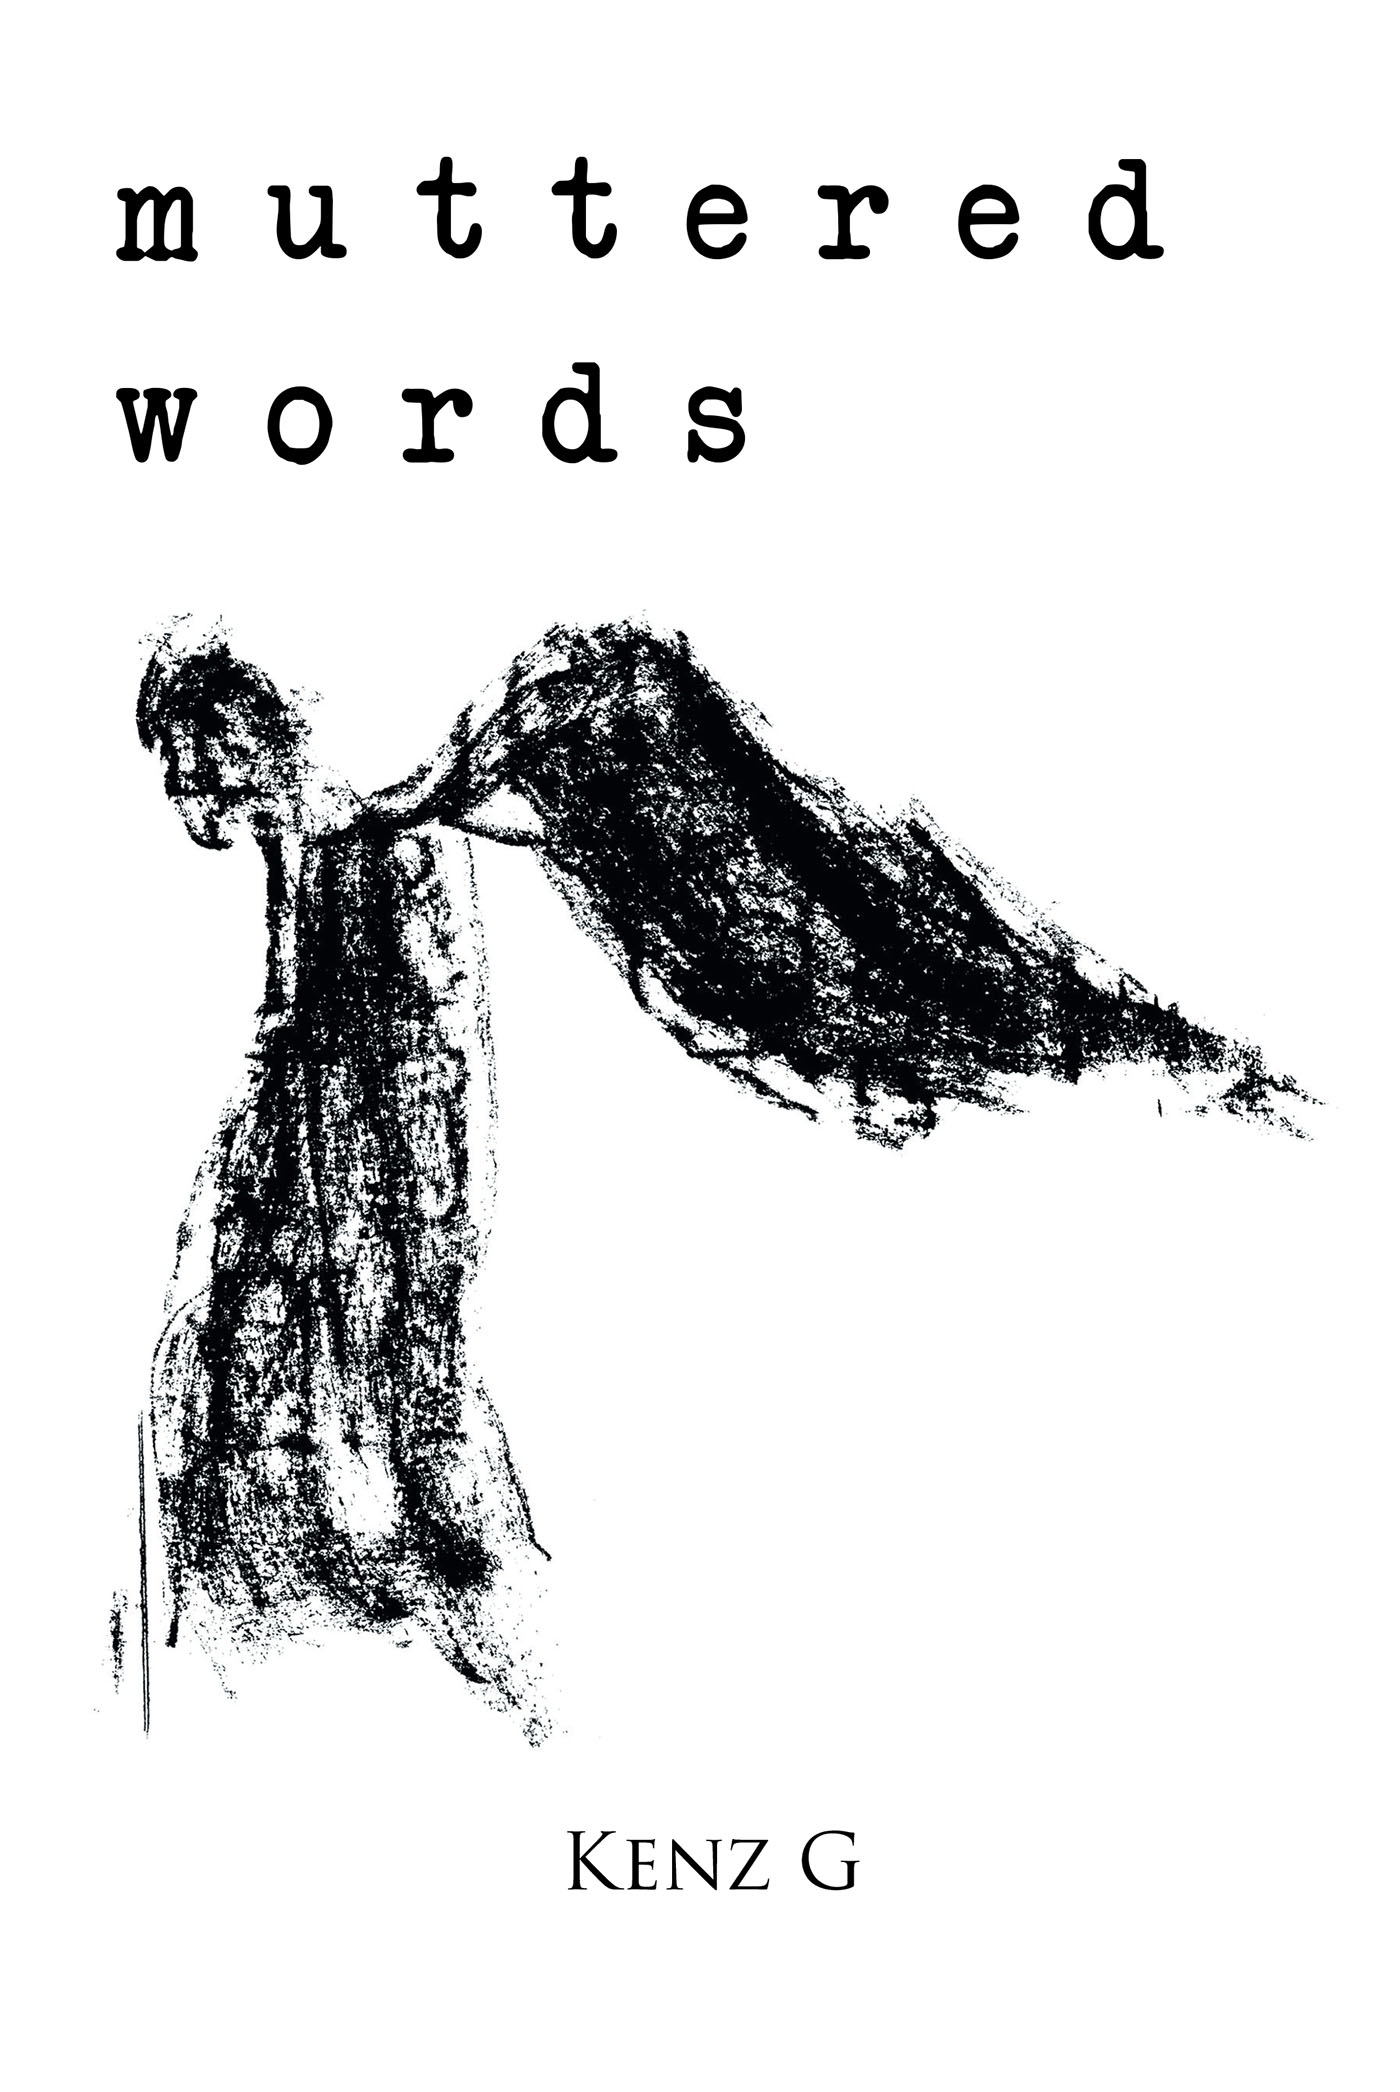 Author Kenz G’s New Book, "Muttered Words," is an Impactful Collection of Raw and Emotional Poetry That Takes Readers Inside the Mind of the Author